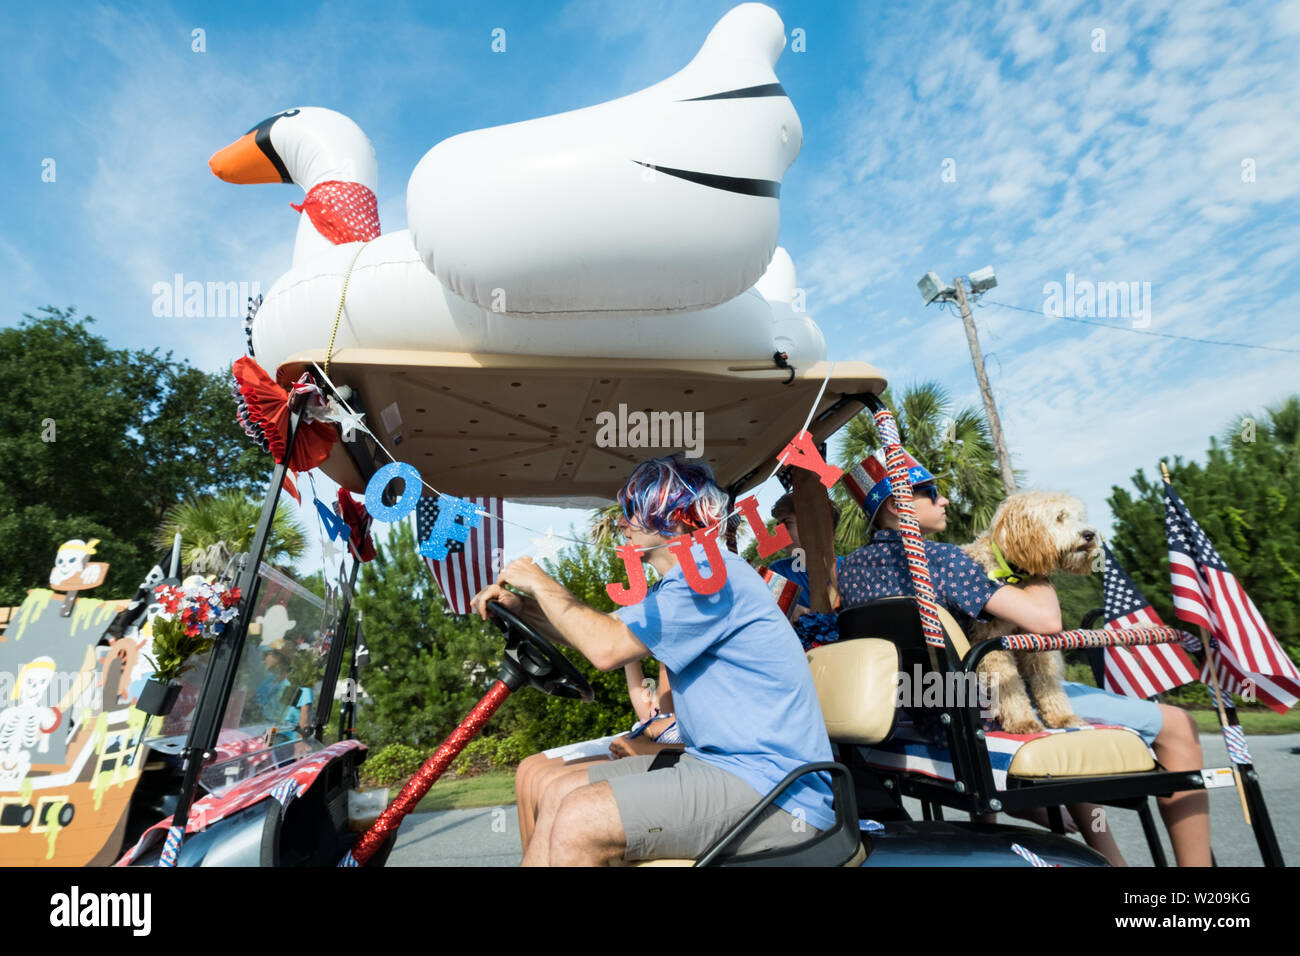 Sullivans Island South Carolina, USA. 4th July, 2019. A family drives their decorated golf cart float during the annual Independence Day parade July 4, 2019 in Sullivan's Island, South Carolina. The tiny affluent Sea Island beach community across from Charleston holds an outsized golf cart parade featuring more than 75 decorated carts. Credit: Planetpix/Alamy Live News Stock Photo